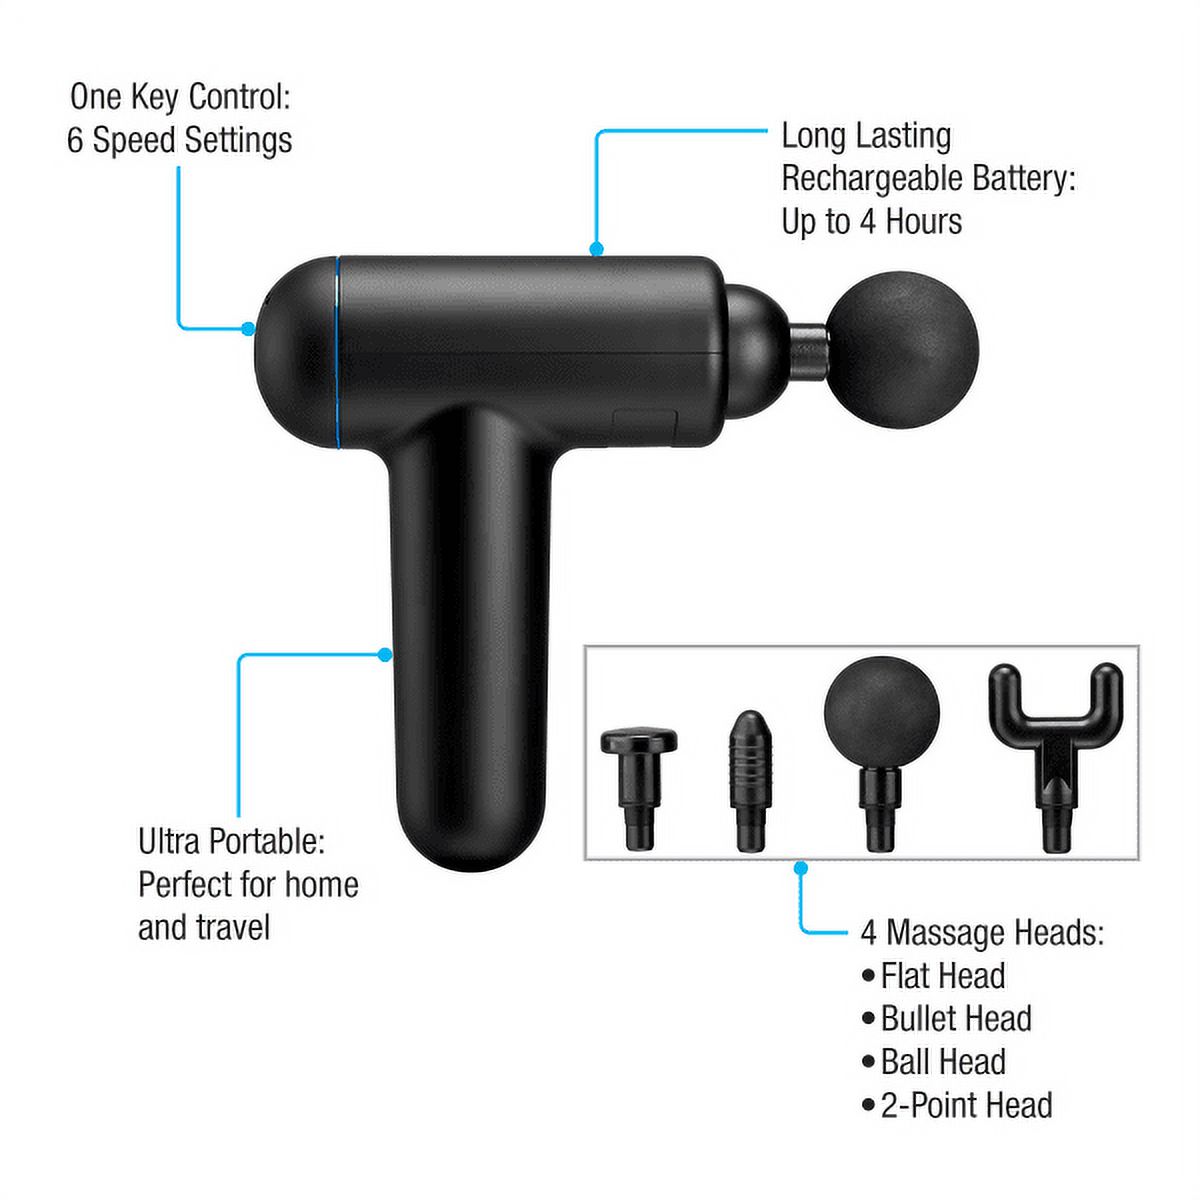 iLive Personal Handheld Massager, IMP301 - image 4 of 6